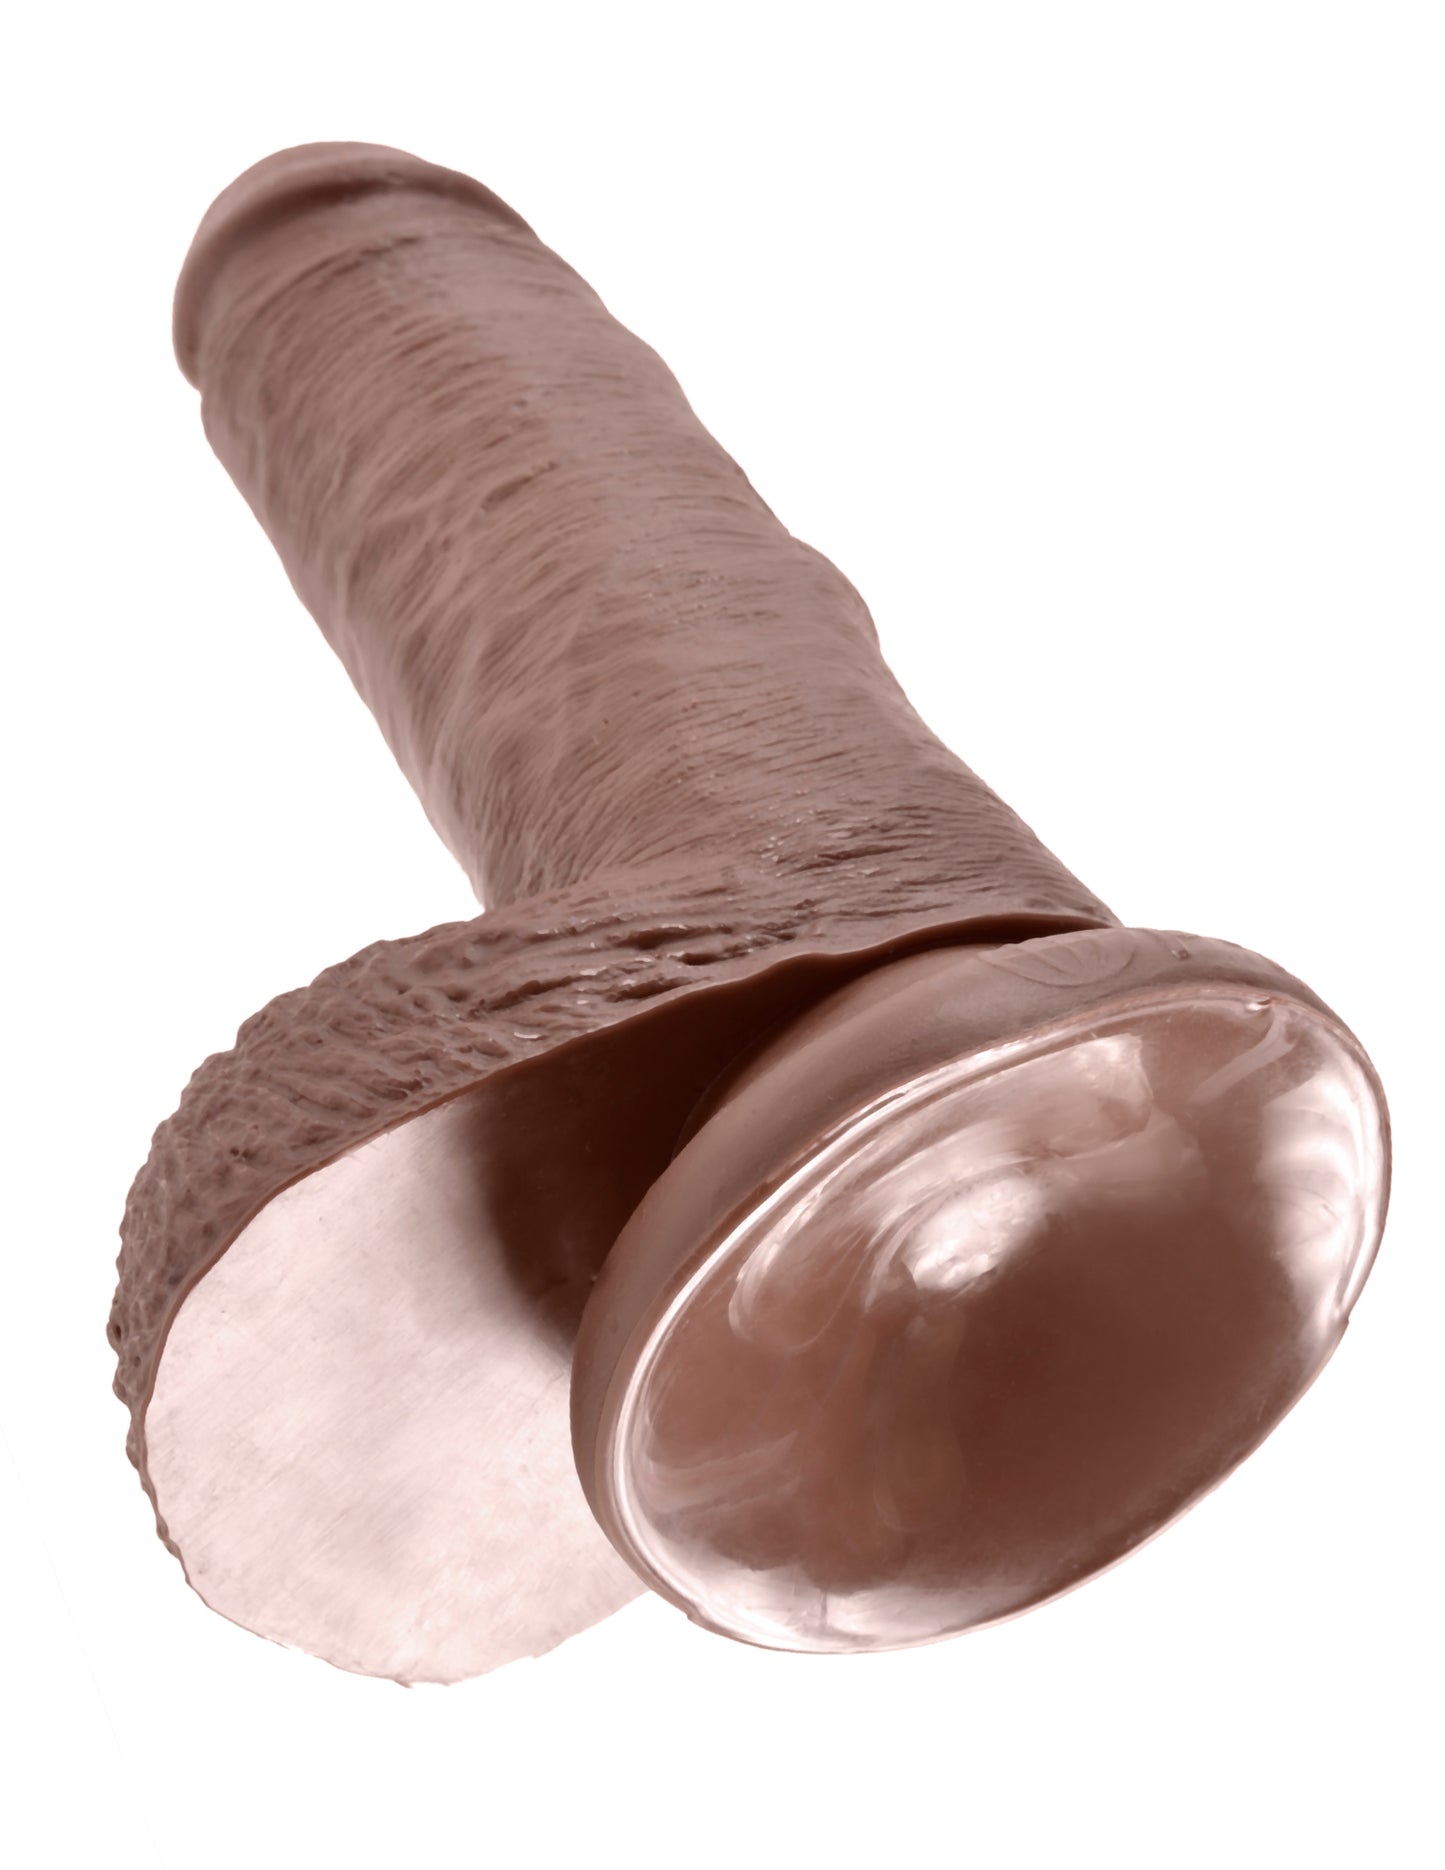 King Cock - 7 inch with balls - Brown